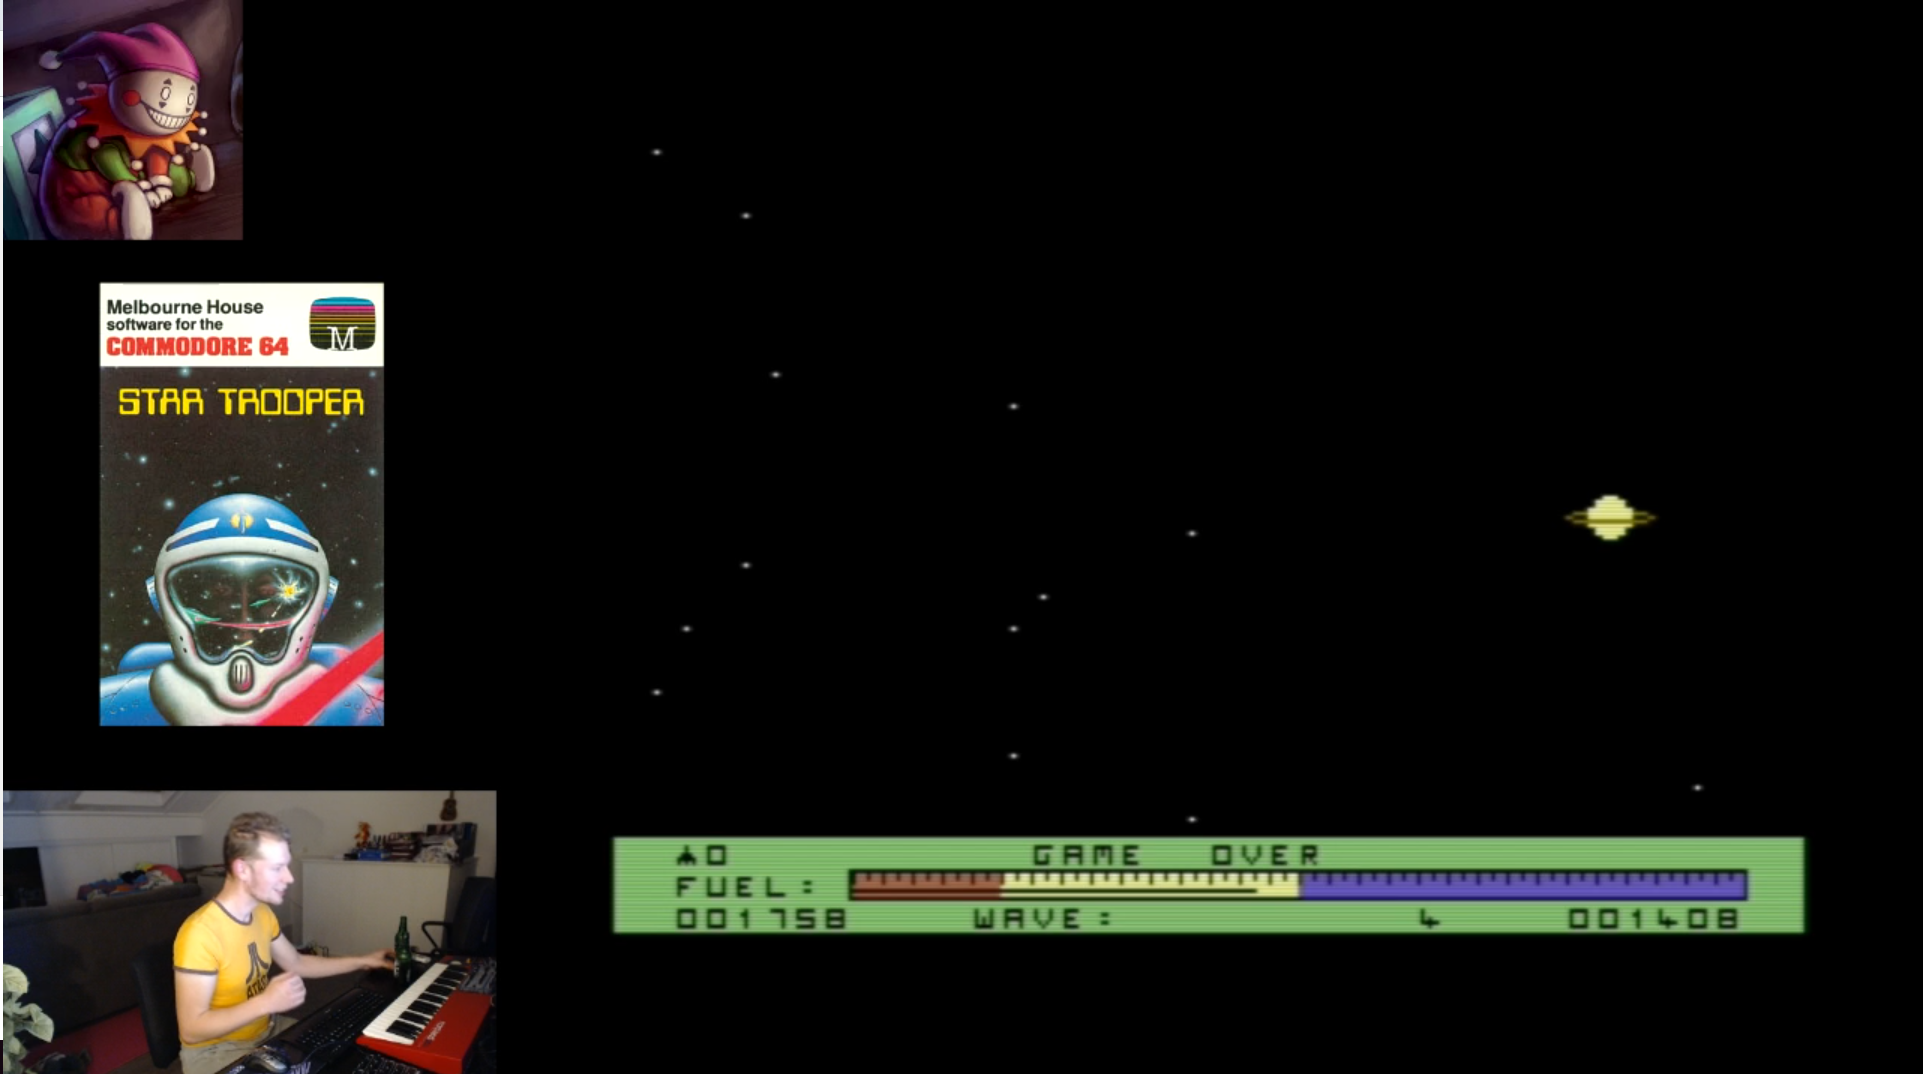 LittleJester: Star Trooper (Commodore 64 Emulated) 1,758 points on 2018-03-12 23:34:33